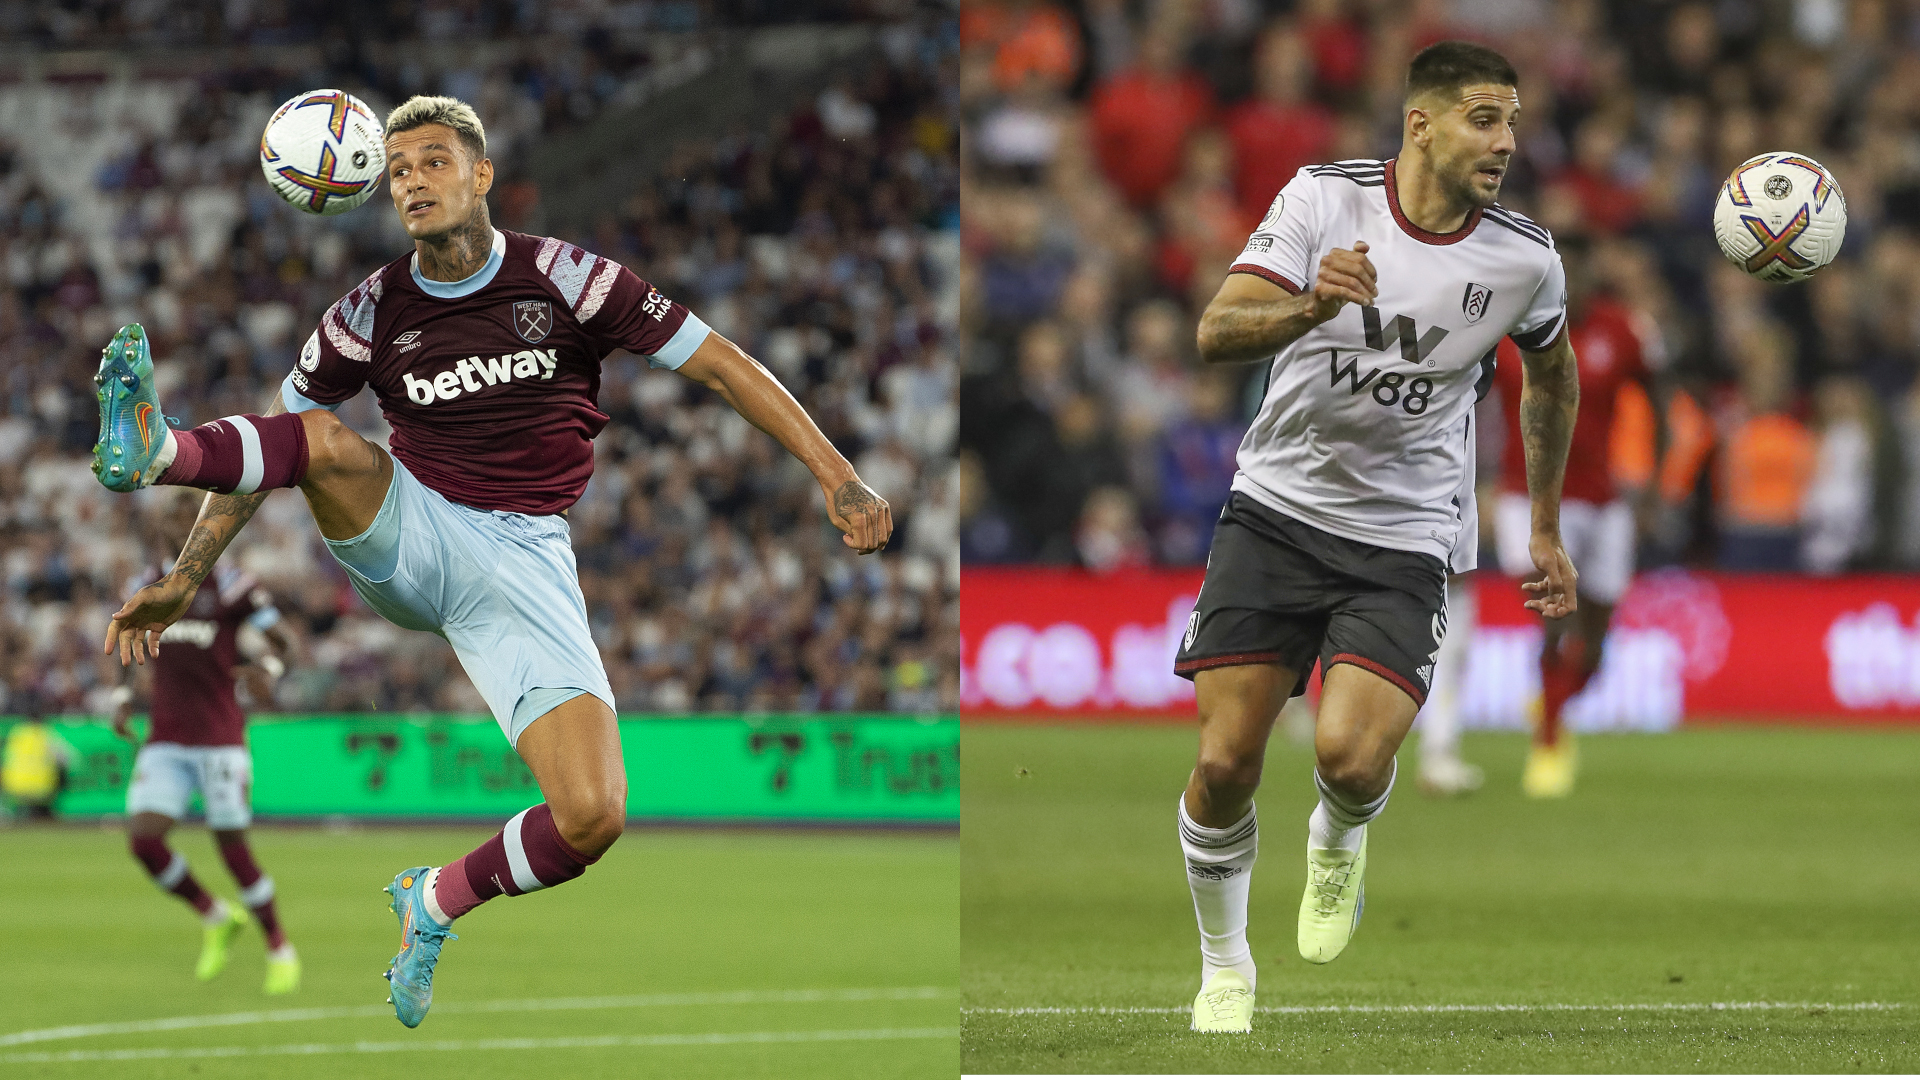 West Ham vs Fulham live stream how to watch the Premier League online and on TV from anywhere, team news TechRadar